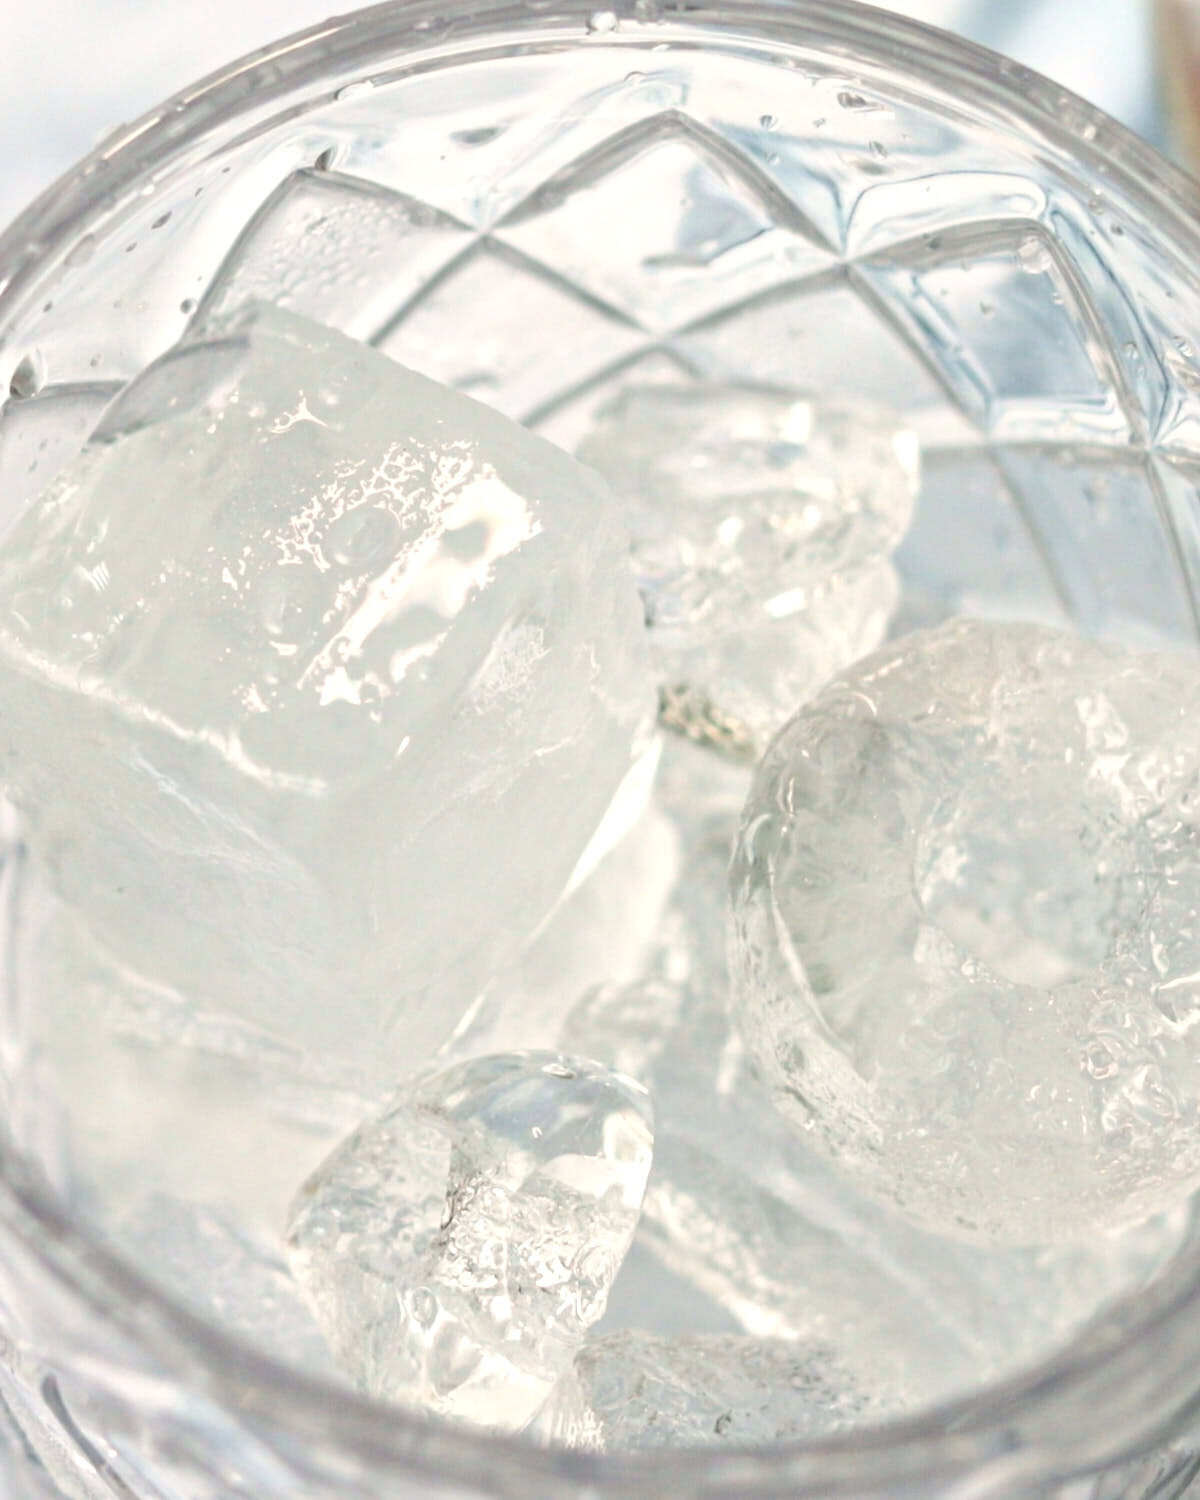 A glass cocktail shaker filled with ice for Spicy Pineapple Margaritas.